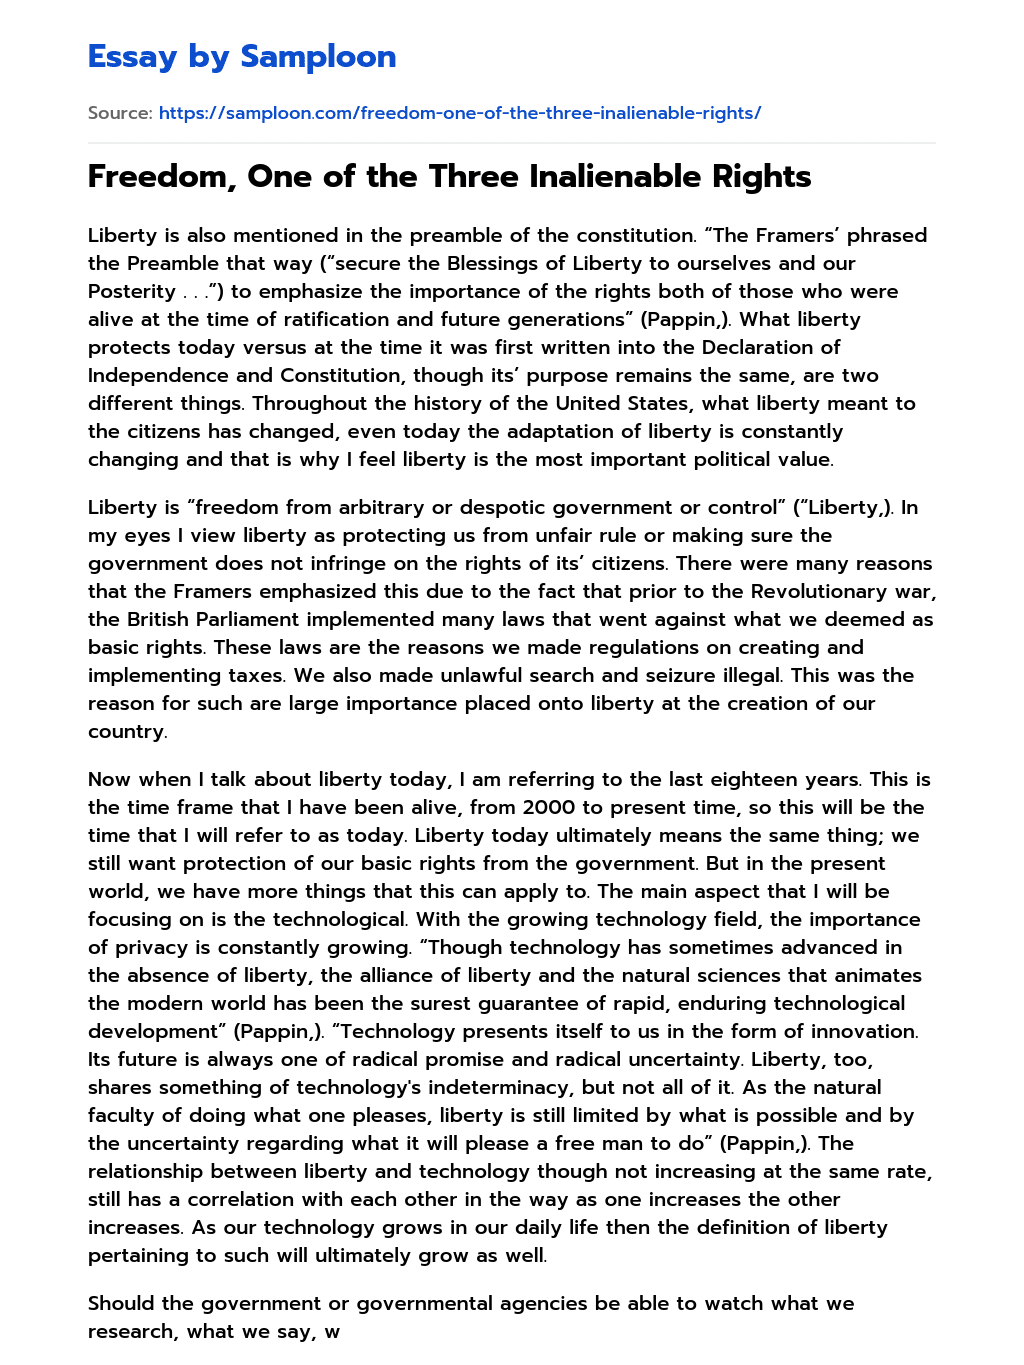 Freedom, One of the Three Inalienable Rights essay